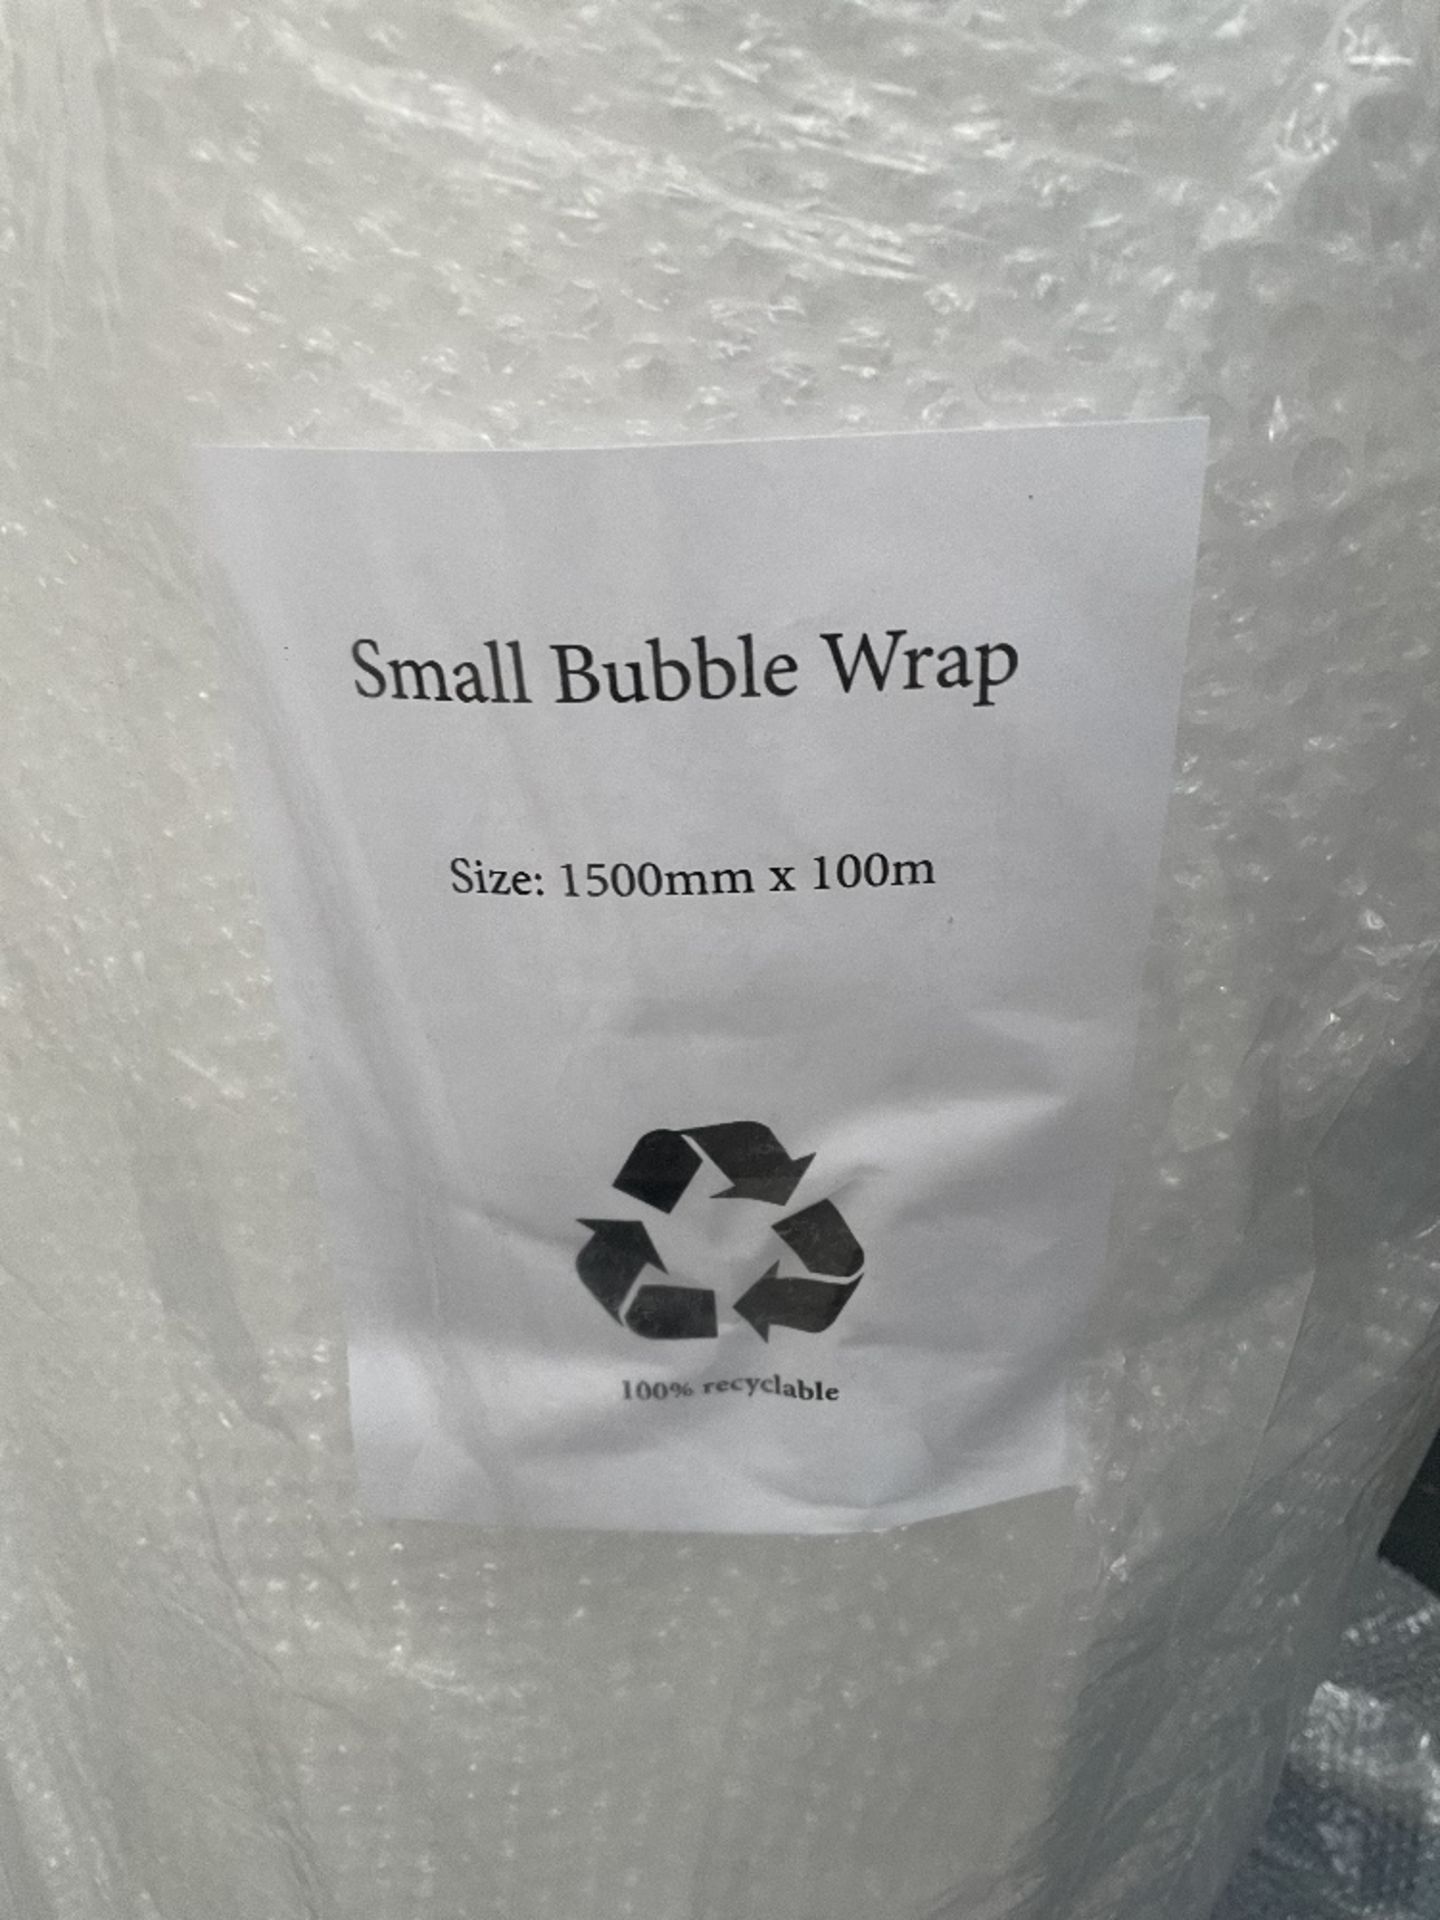 3 x Rolls of Small Bubble Wrap | 1500m - Image 2 of 2